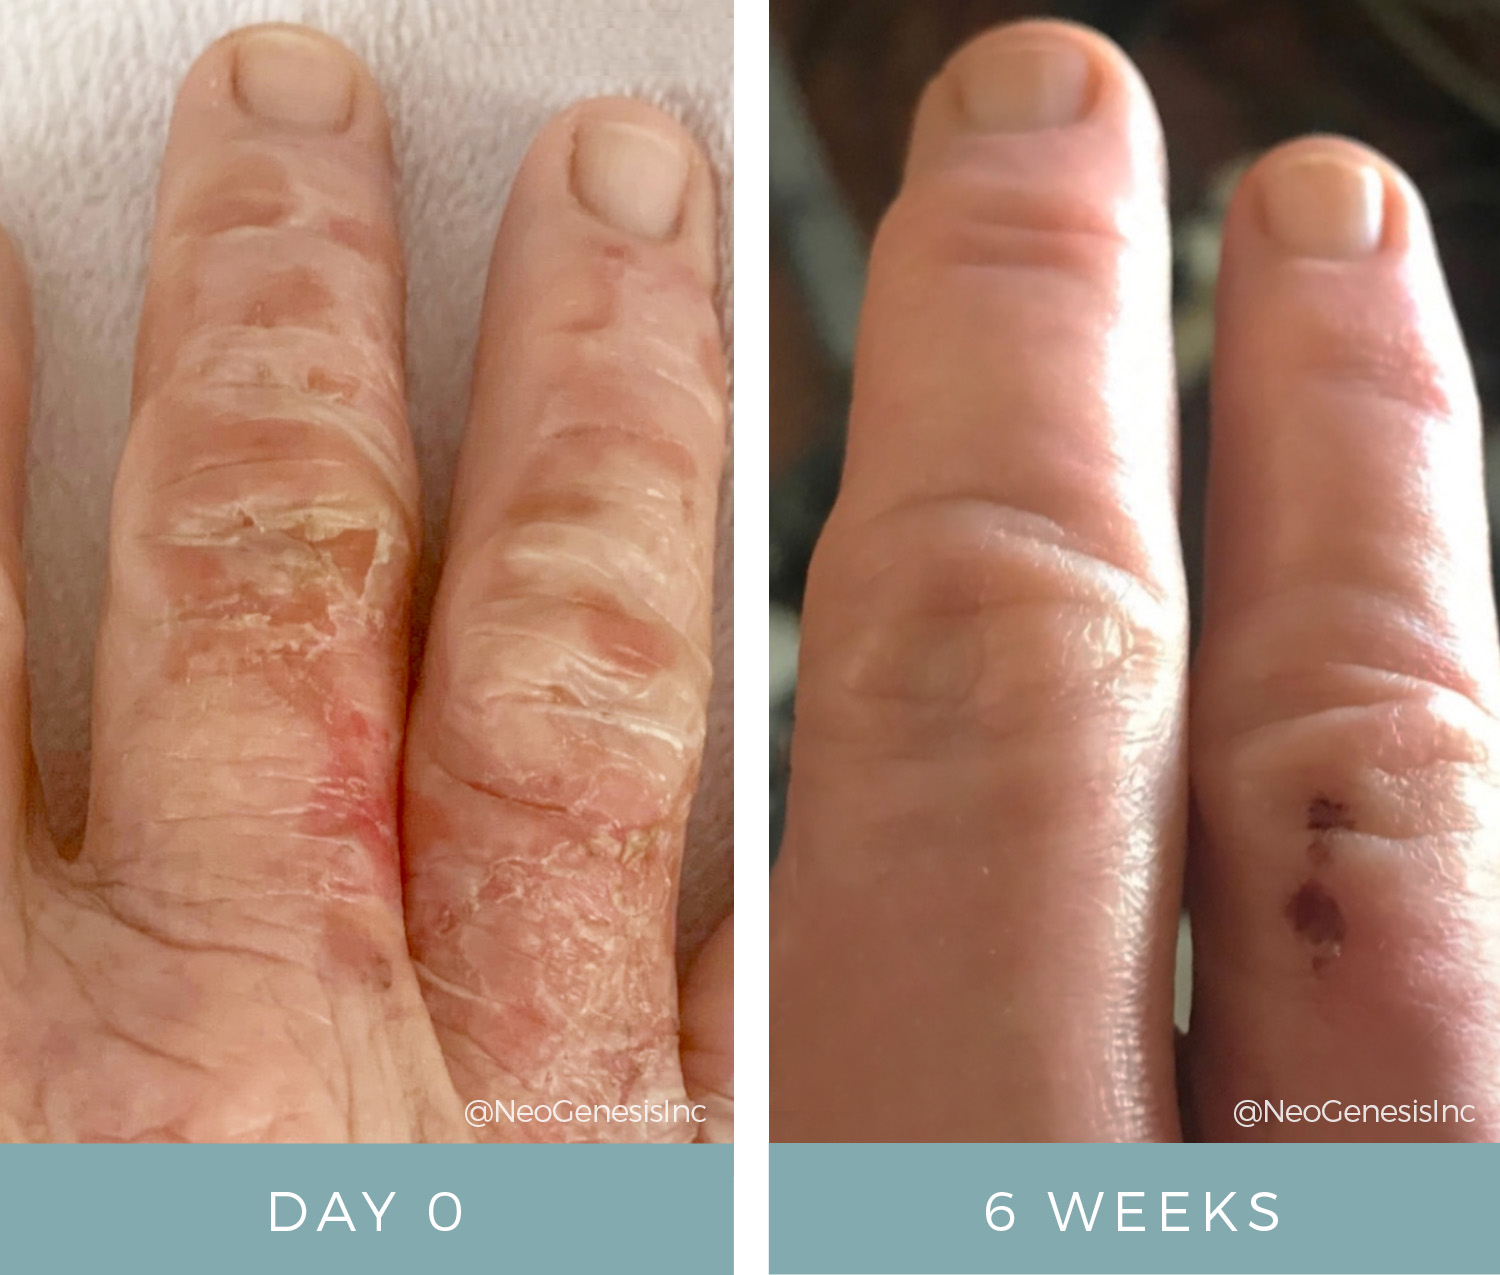 Before + After - Wound Care - Boiling Water Burn on Fingers